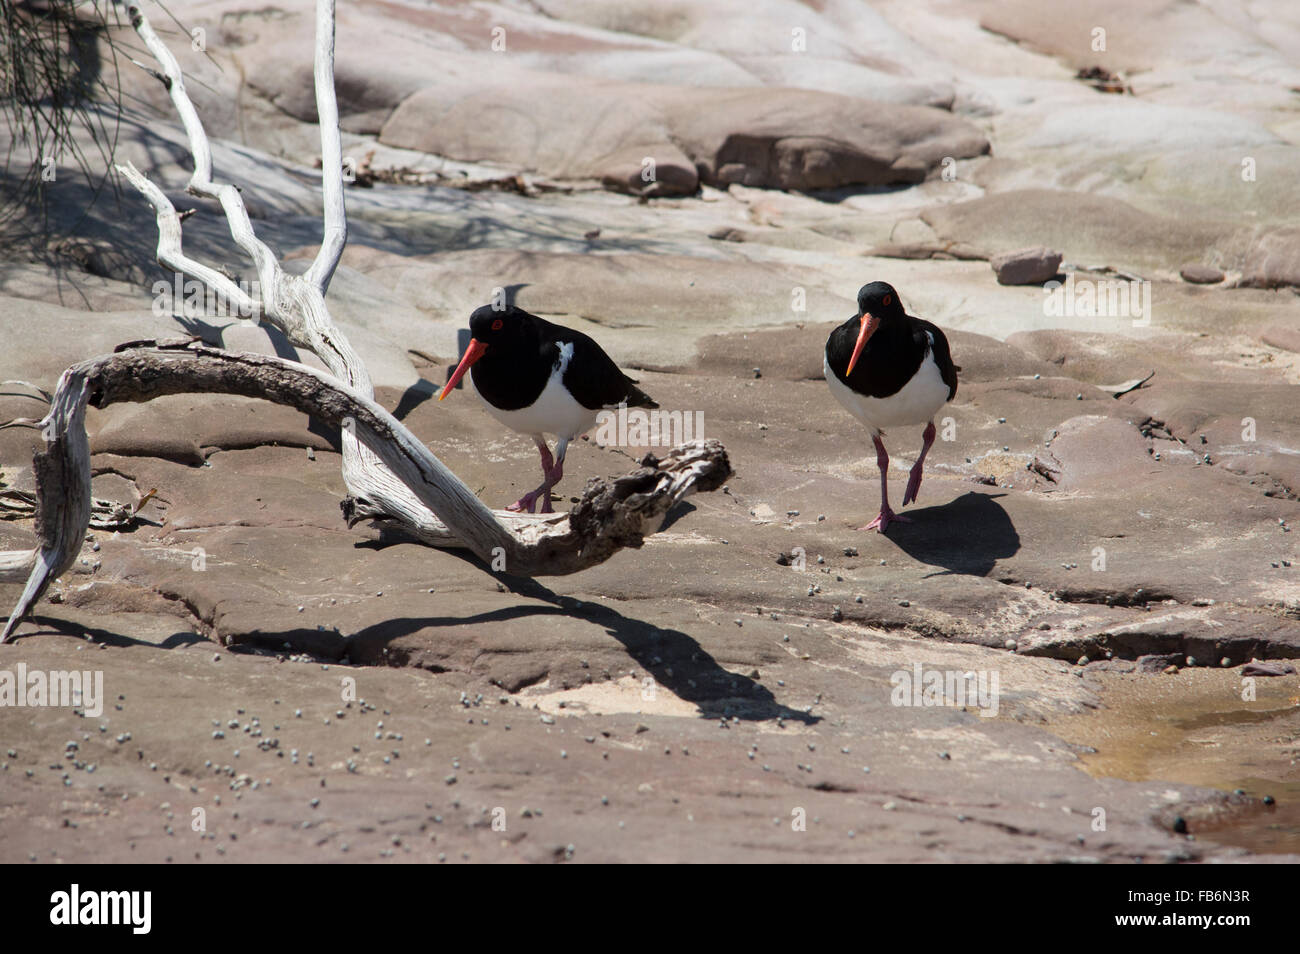 Pied Oystercatcher  Haematopus longirostris.  A pair of pied oystercatchers roaming on the rocks hunting for food. Stock Photo